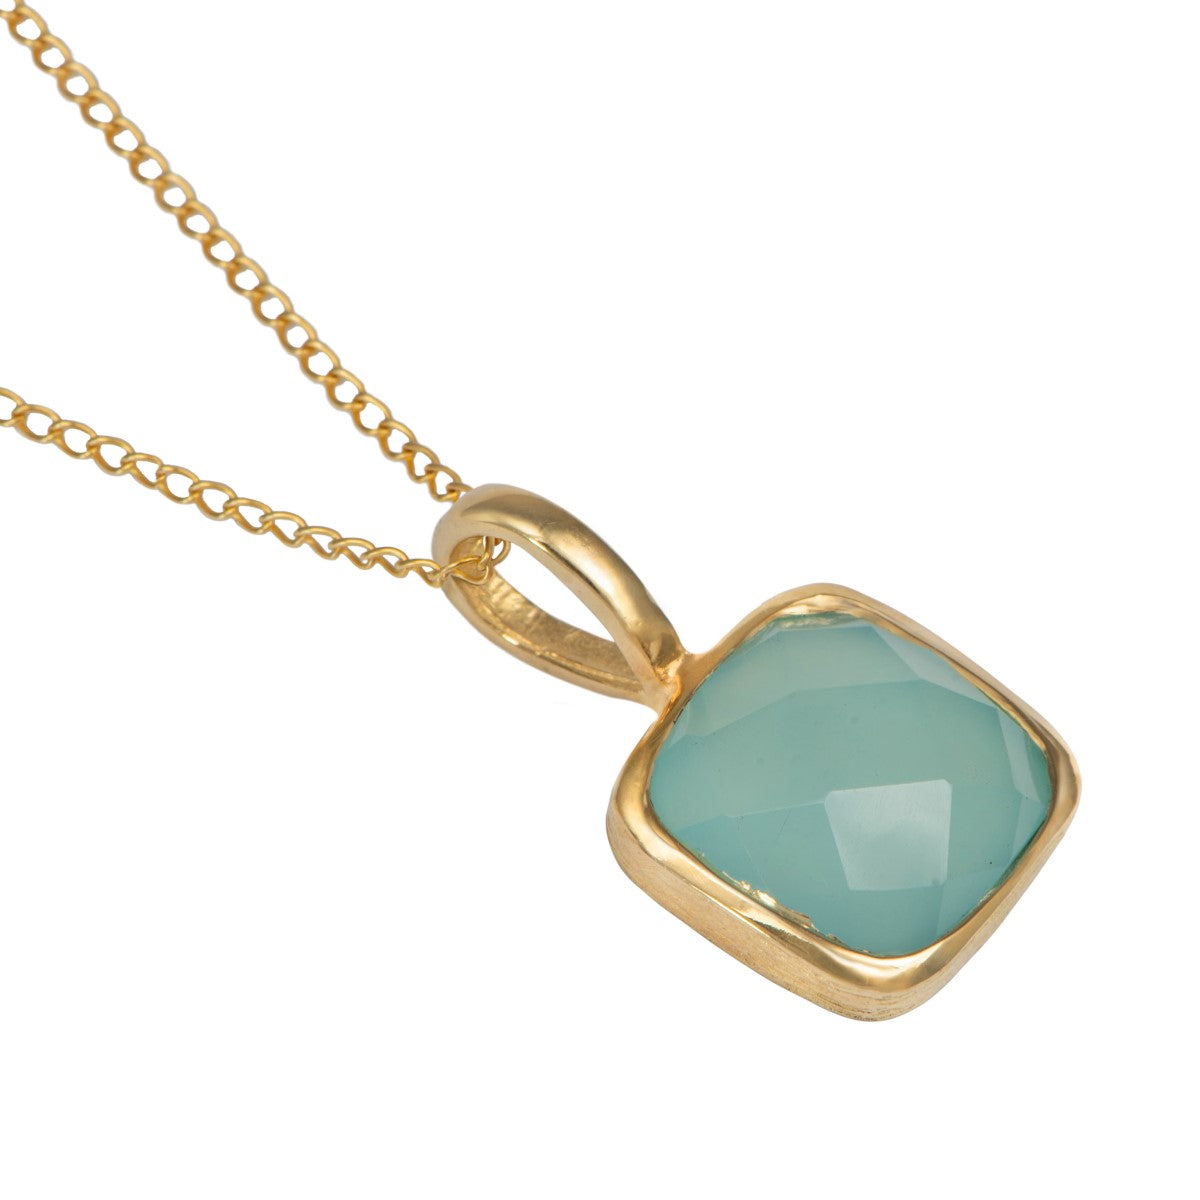 Gold Plated Sterling Silver Pendant Necklace with a Faceted Square Gemstone - Aqua Chalcedony